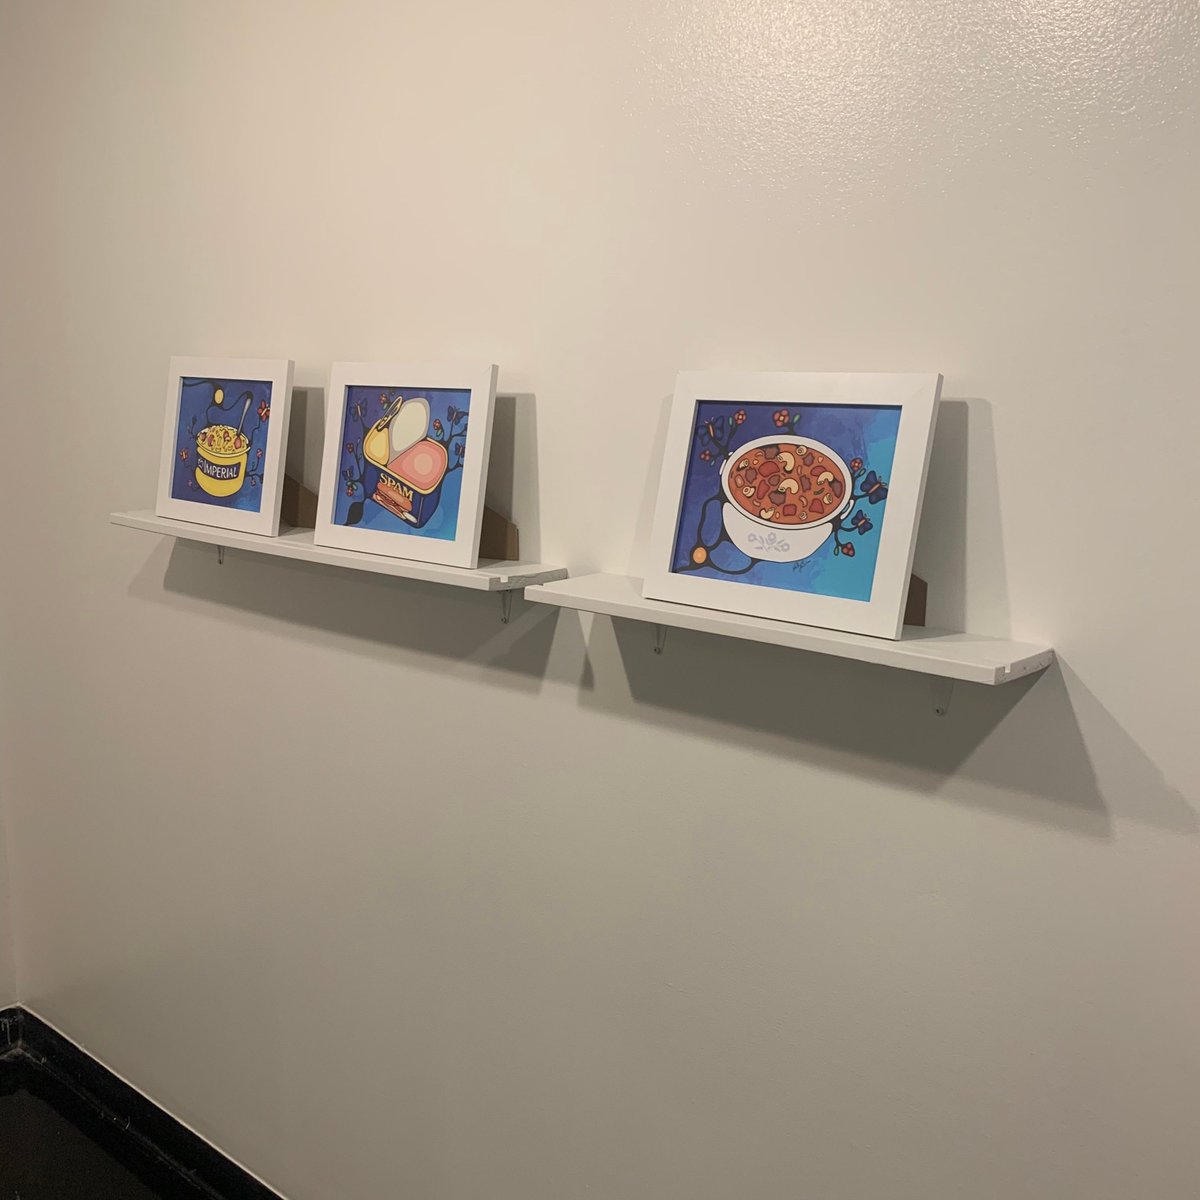 What We Make IV, a #UWinnipeg student and staff art exhibition, is on now through May 17! Drop by Gallery @1c03 weekdays from 12:30 to 3:30 p.m. to see the creative talents of our campus community on display.